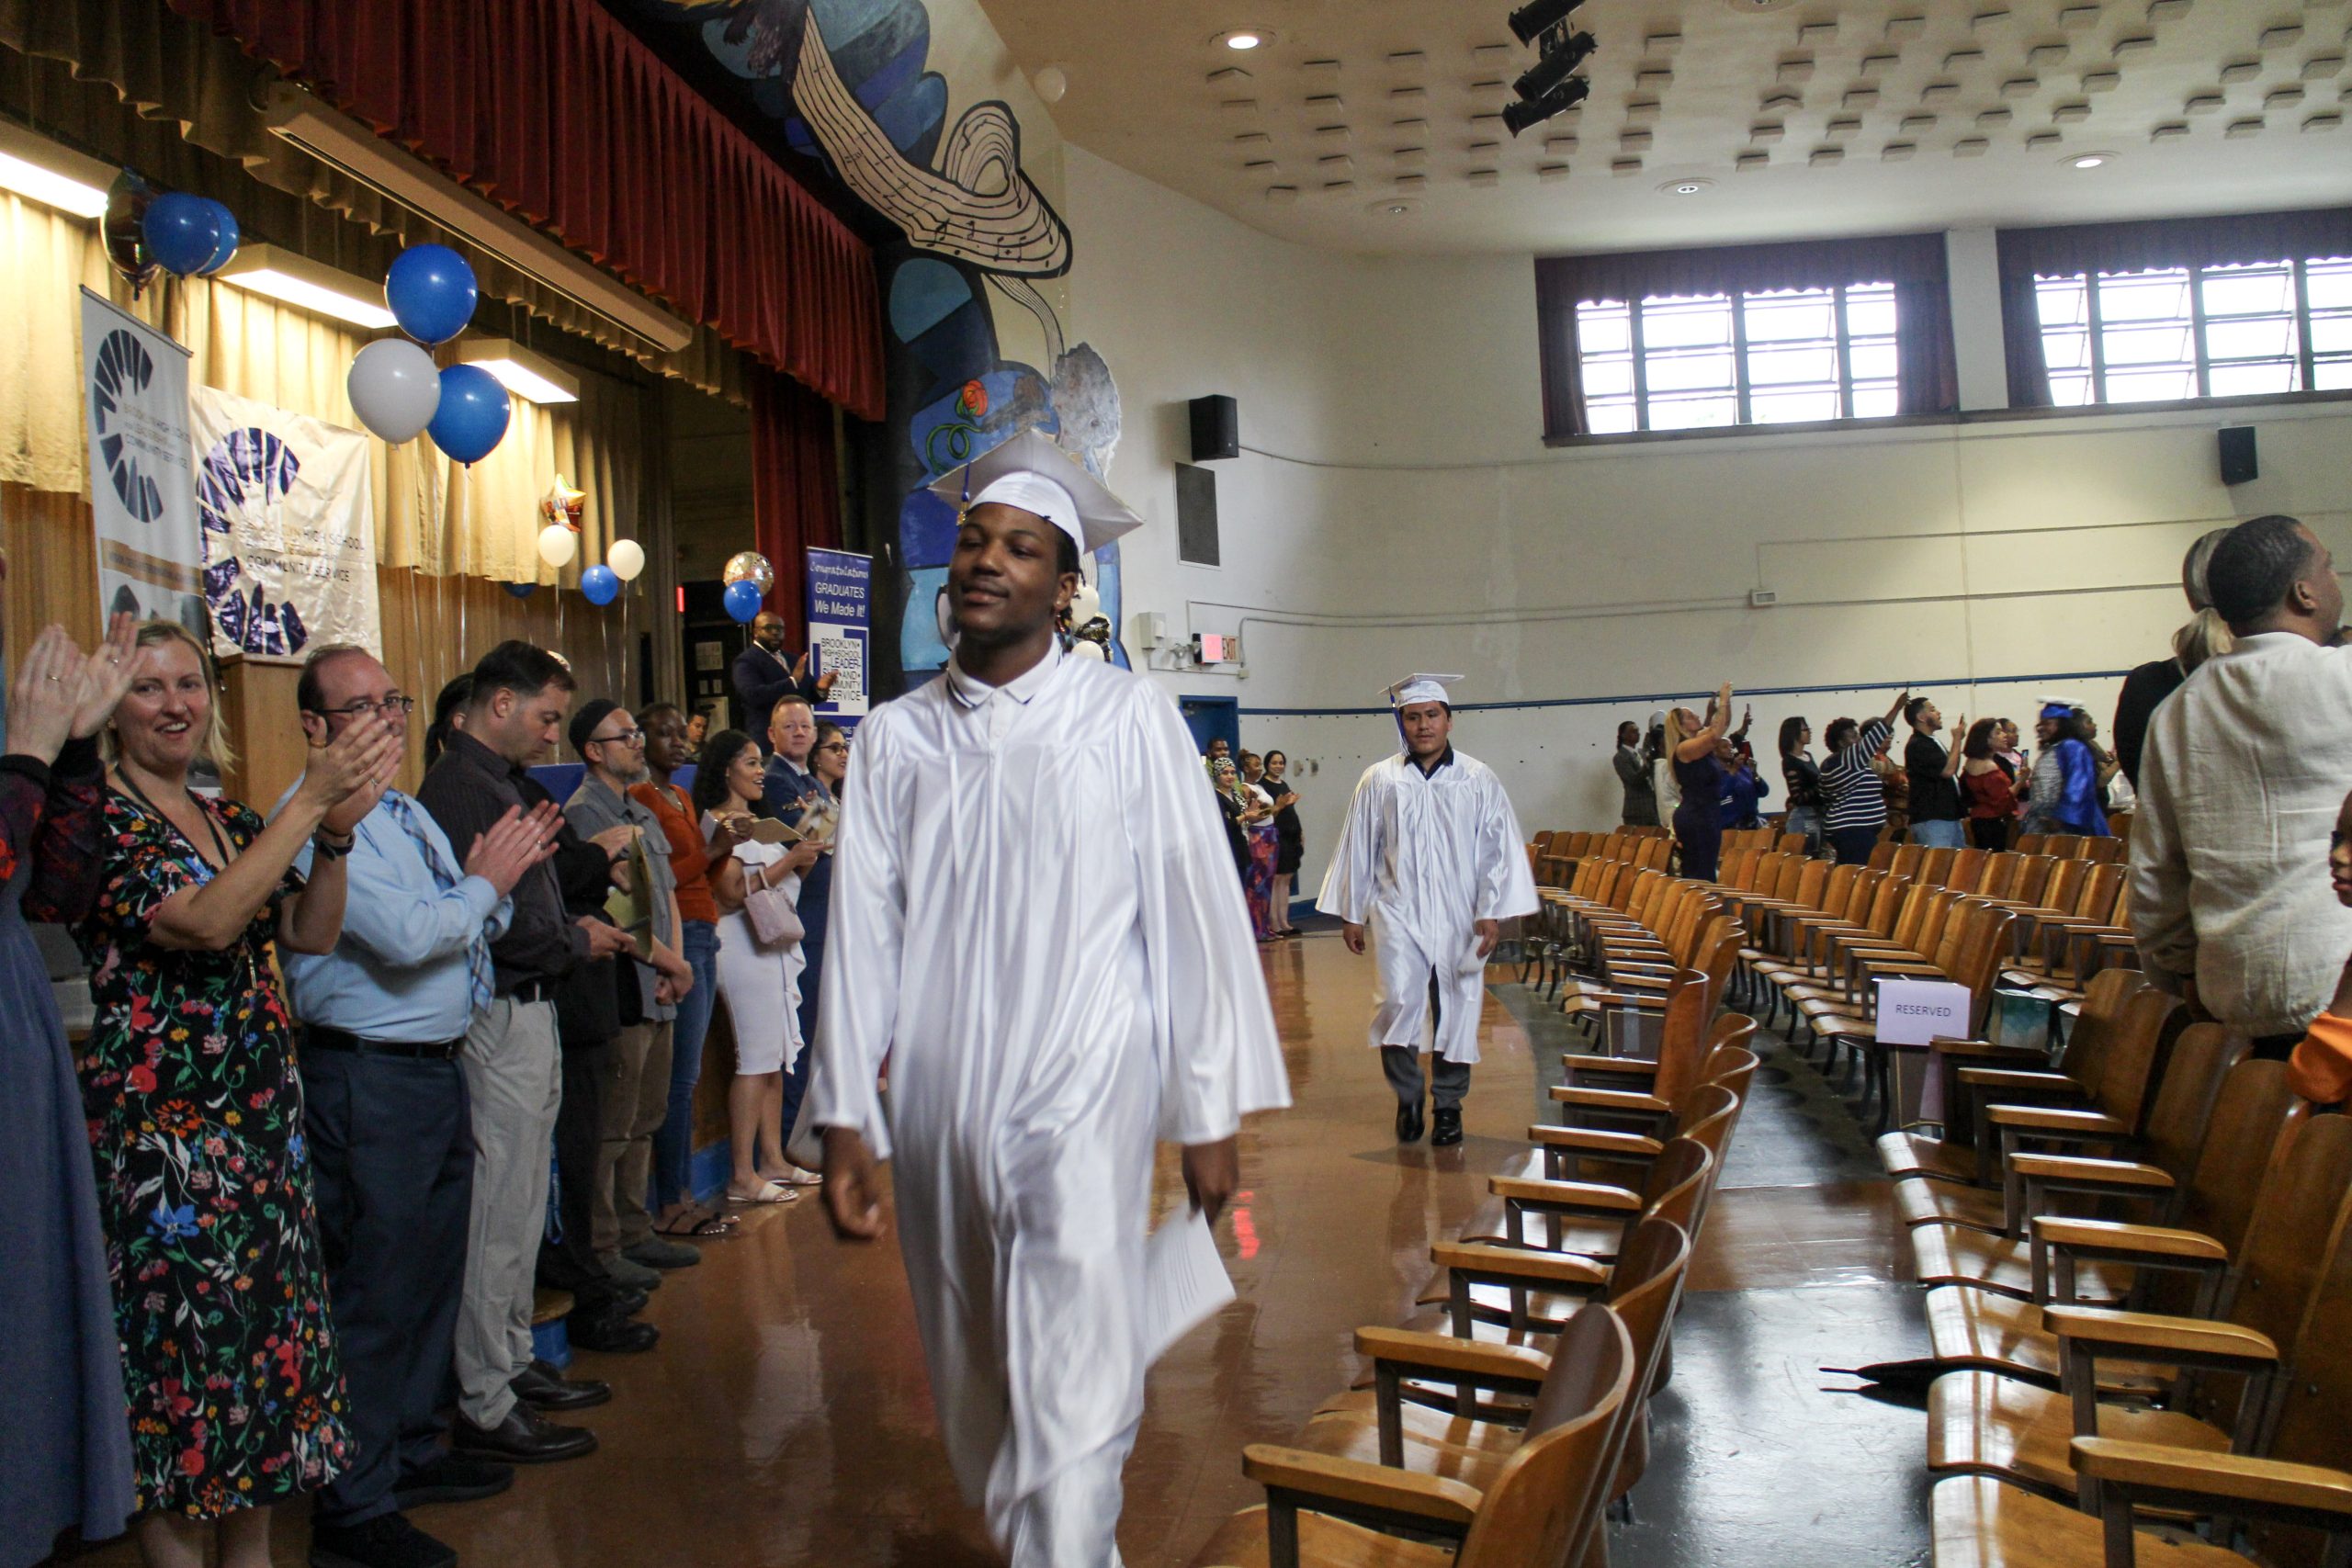 Inside a school auditorium, students in white caps and gowns walk past a line of teachers clapping.